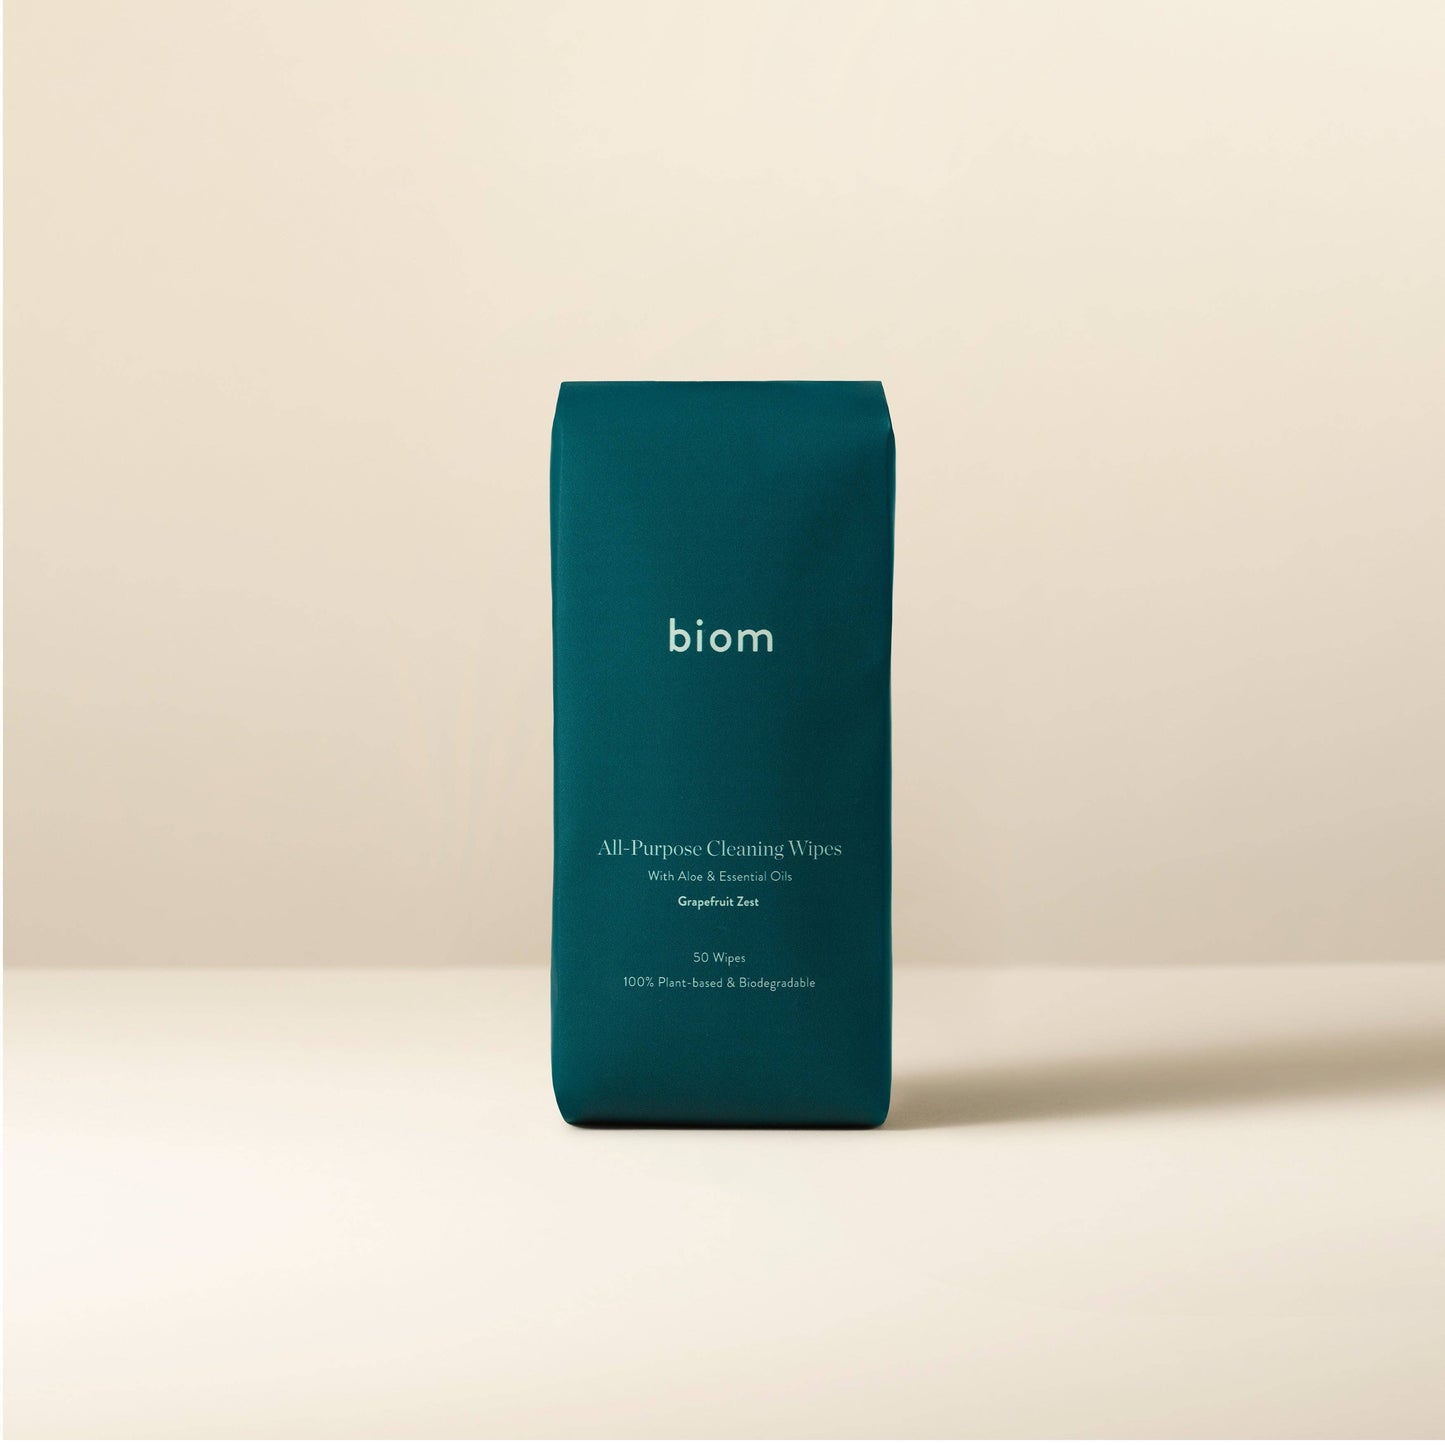 biom - All-Purpose Cleaning Wipes Refills biom